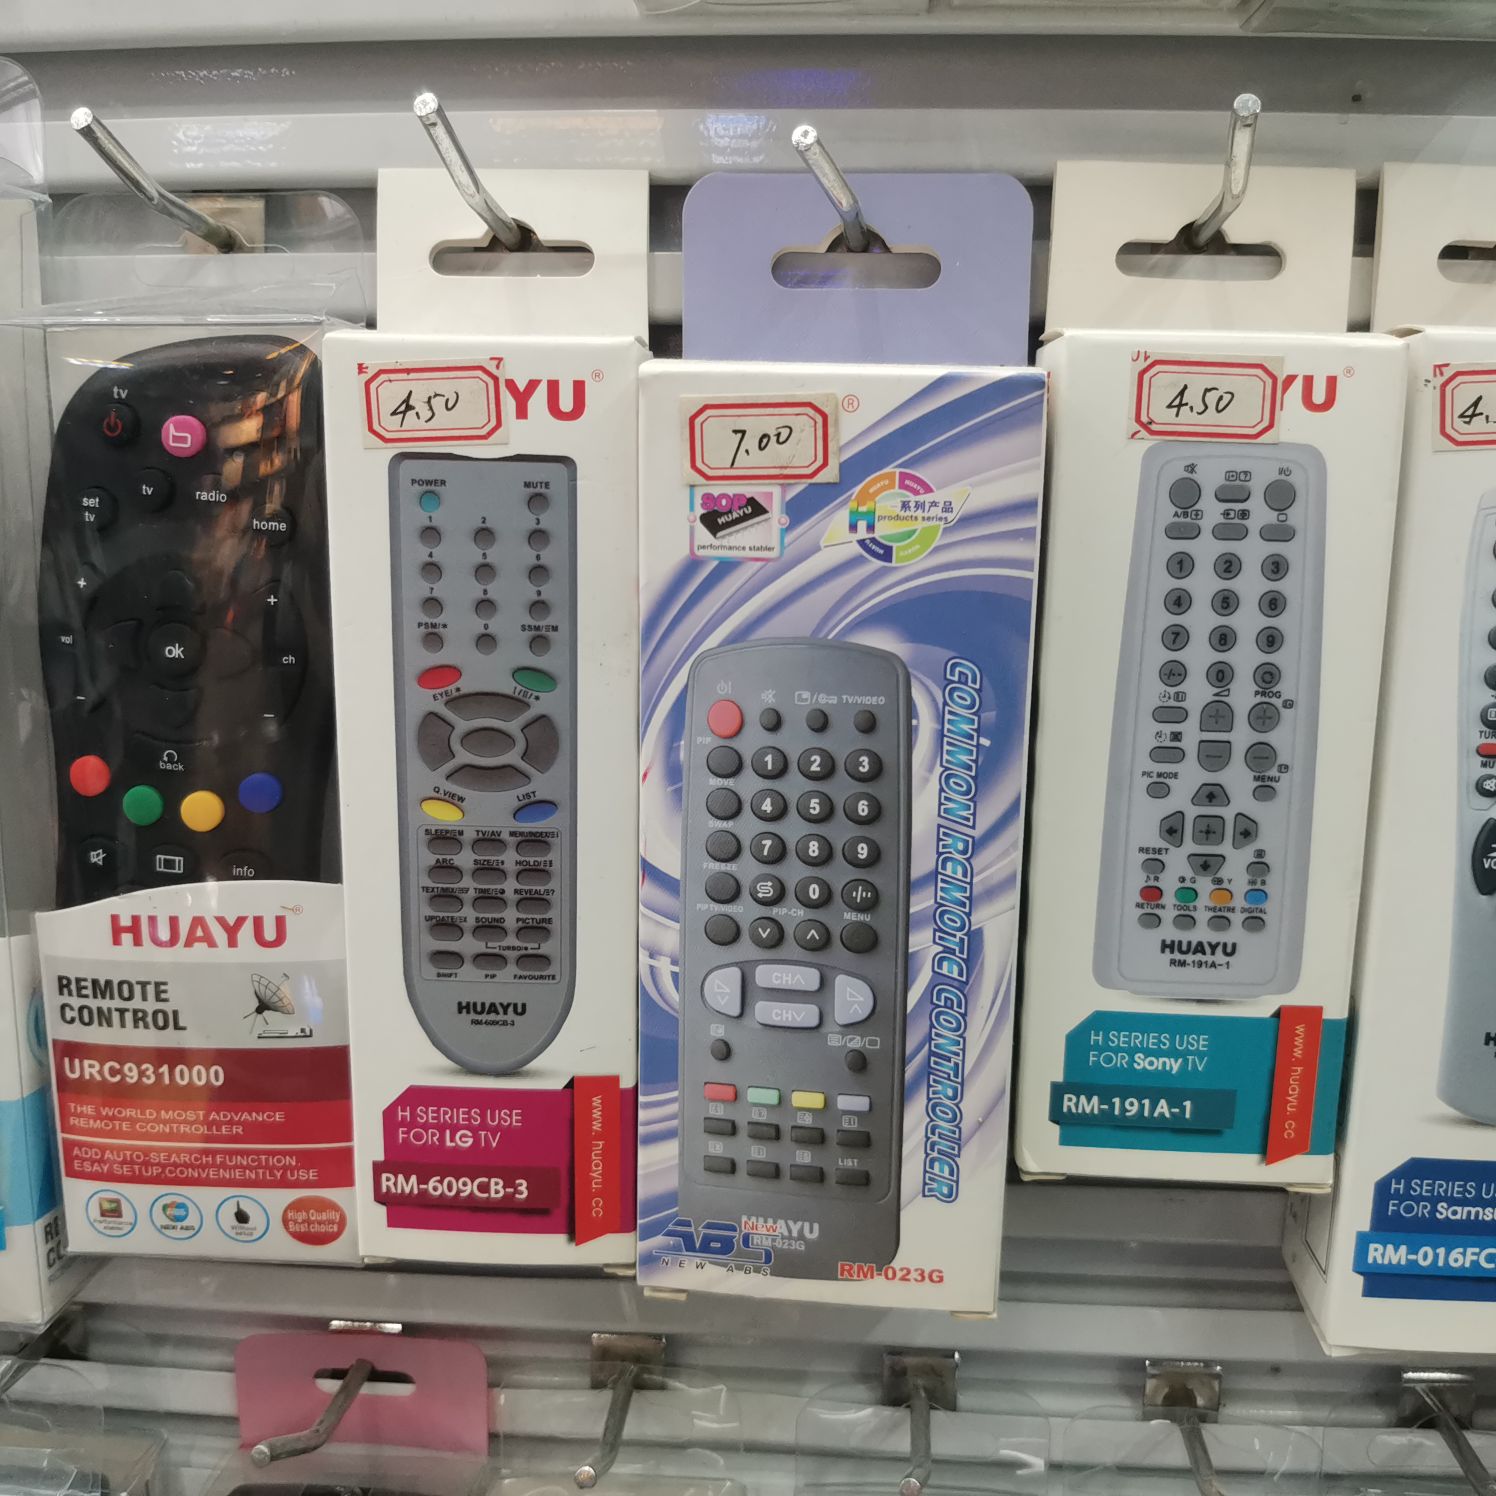 ZN 401S UNIVERSAL LED LCD REMOTE CONTROLLER多功能遥控器万能遥控器详情图3